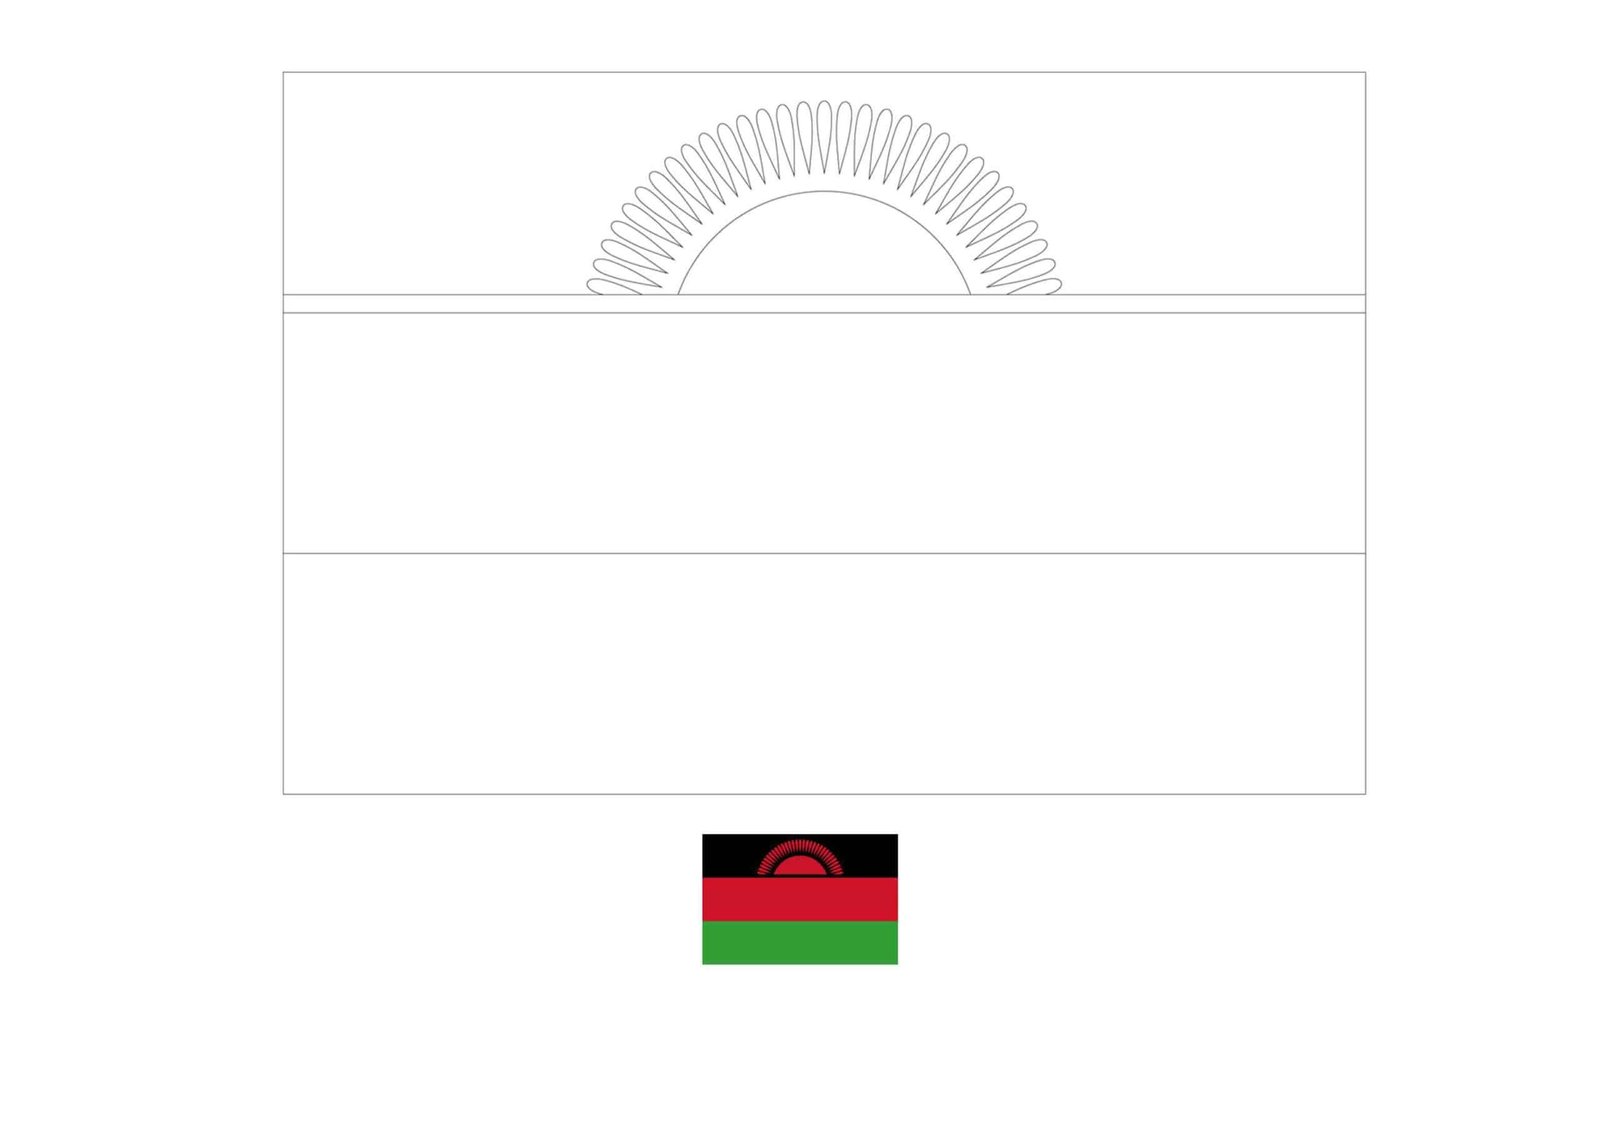 Malawi flag coloring page with a sample